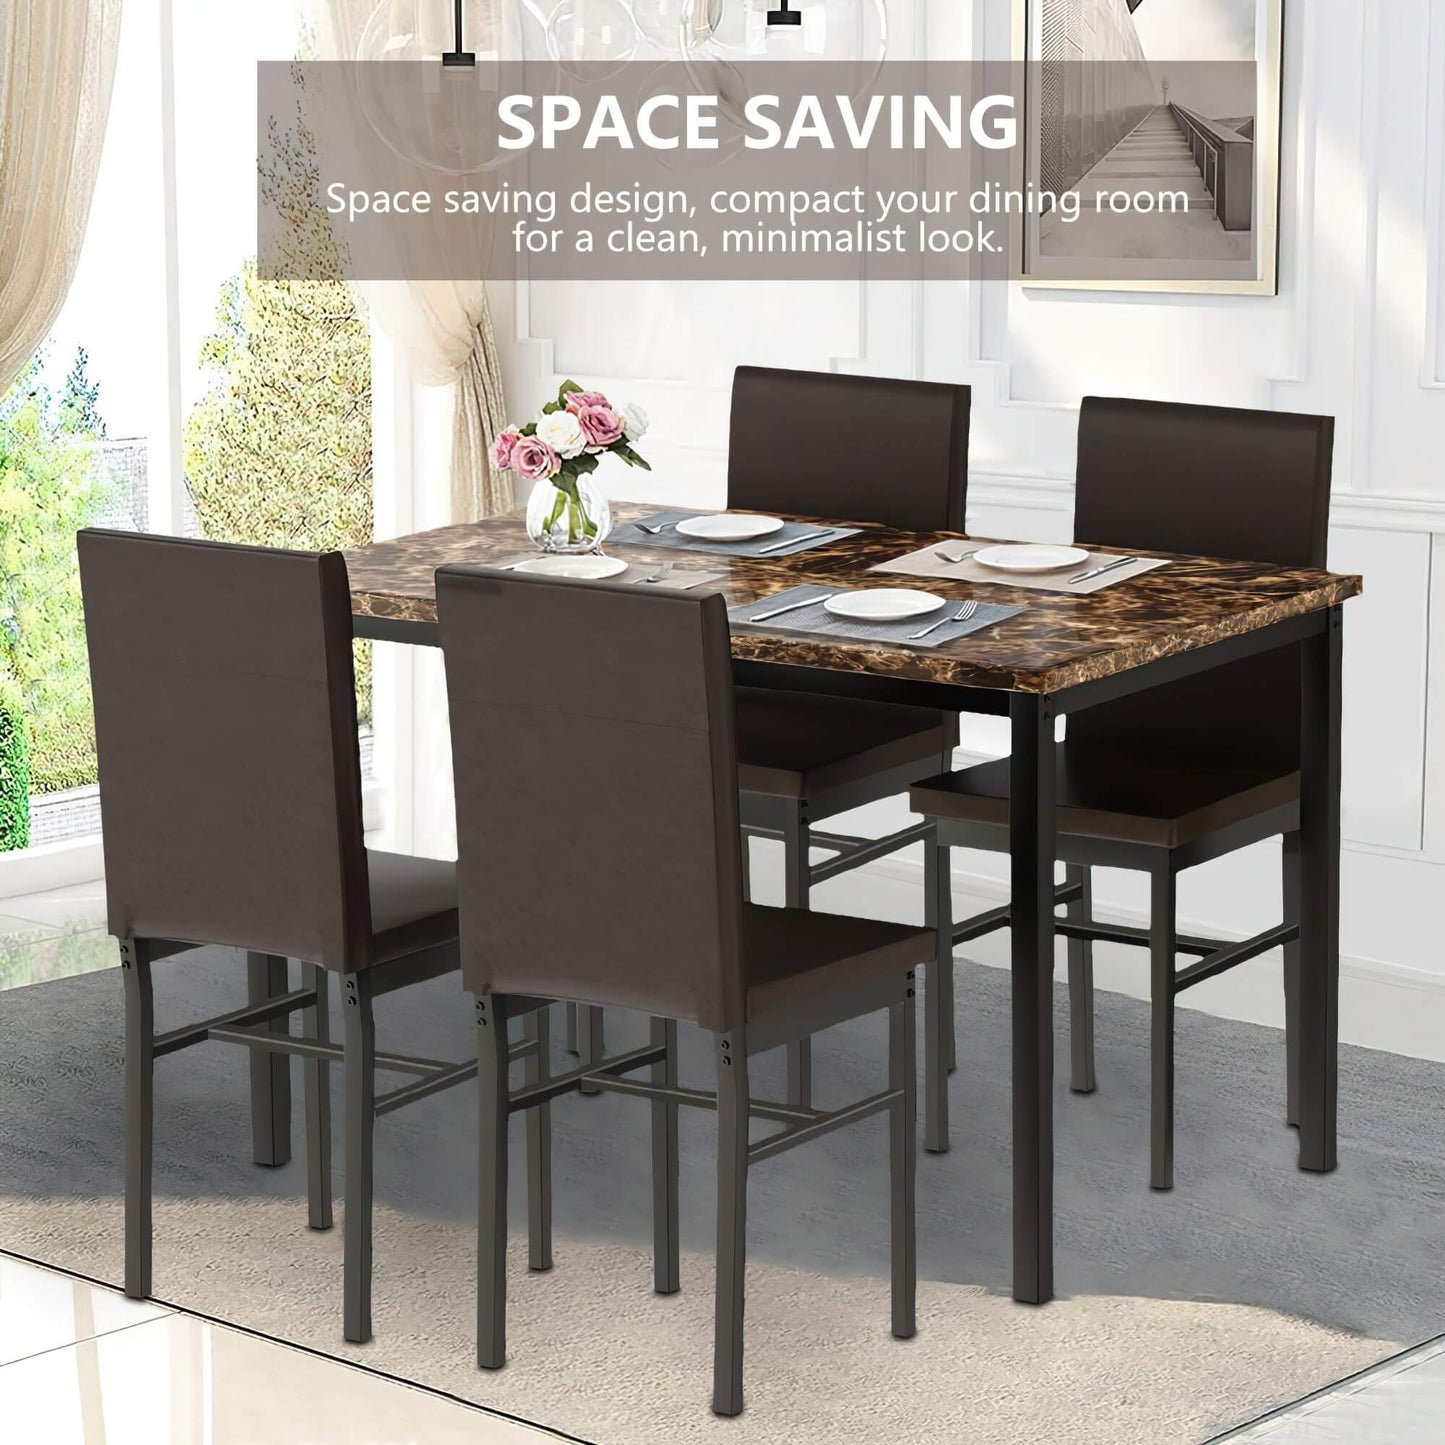 Enchanting WETA 5 Piece Dining Table Set: Contemporary Faux Marble Tabletop with 4 PU Leather Upholstered Chairs